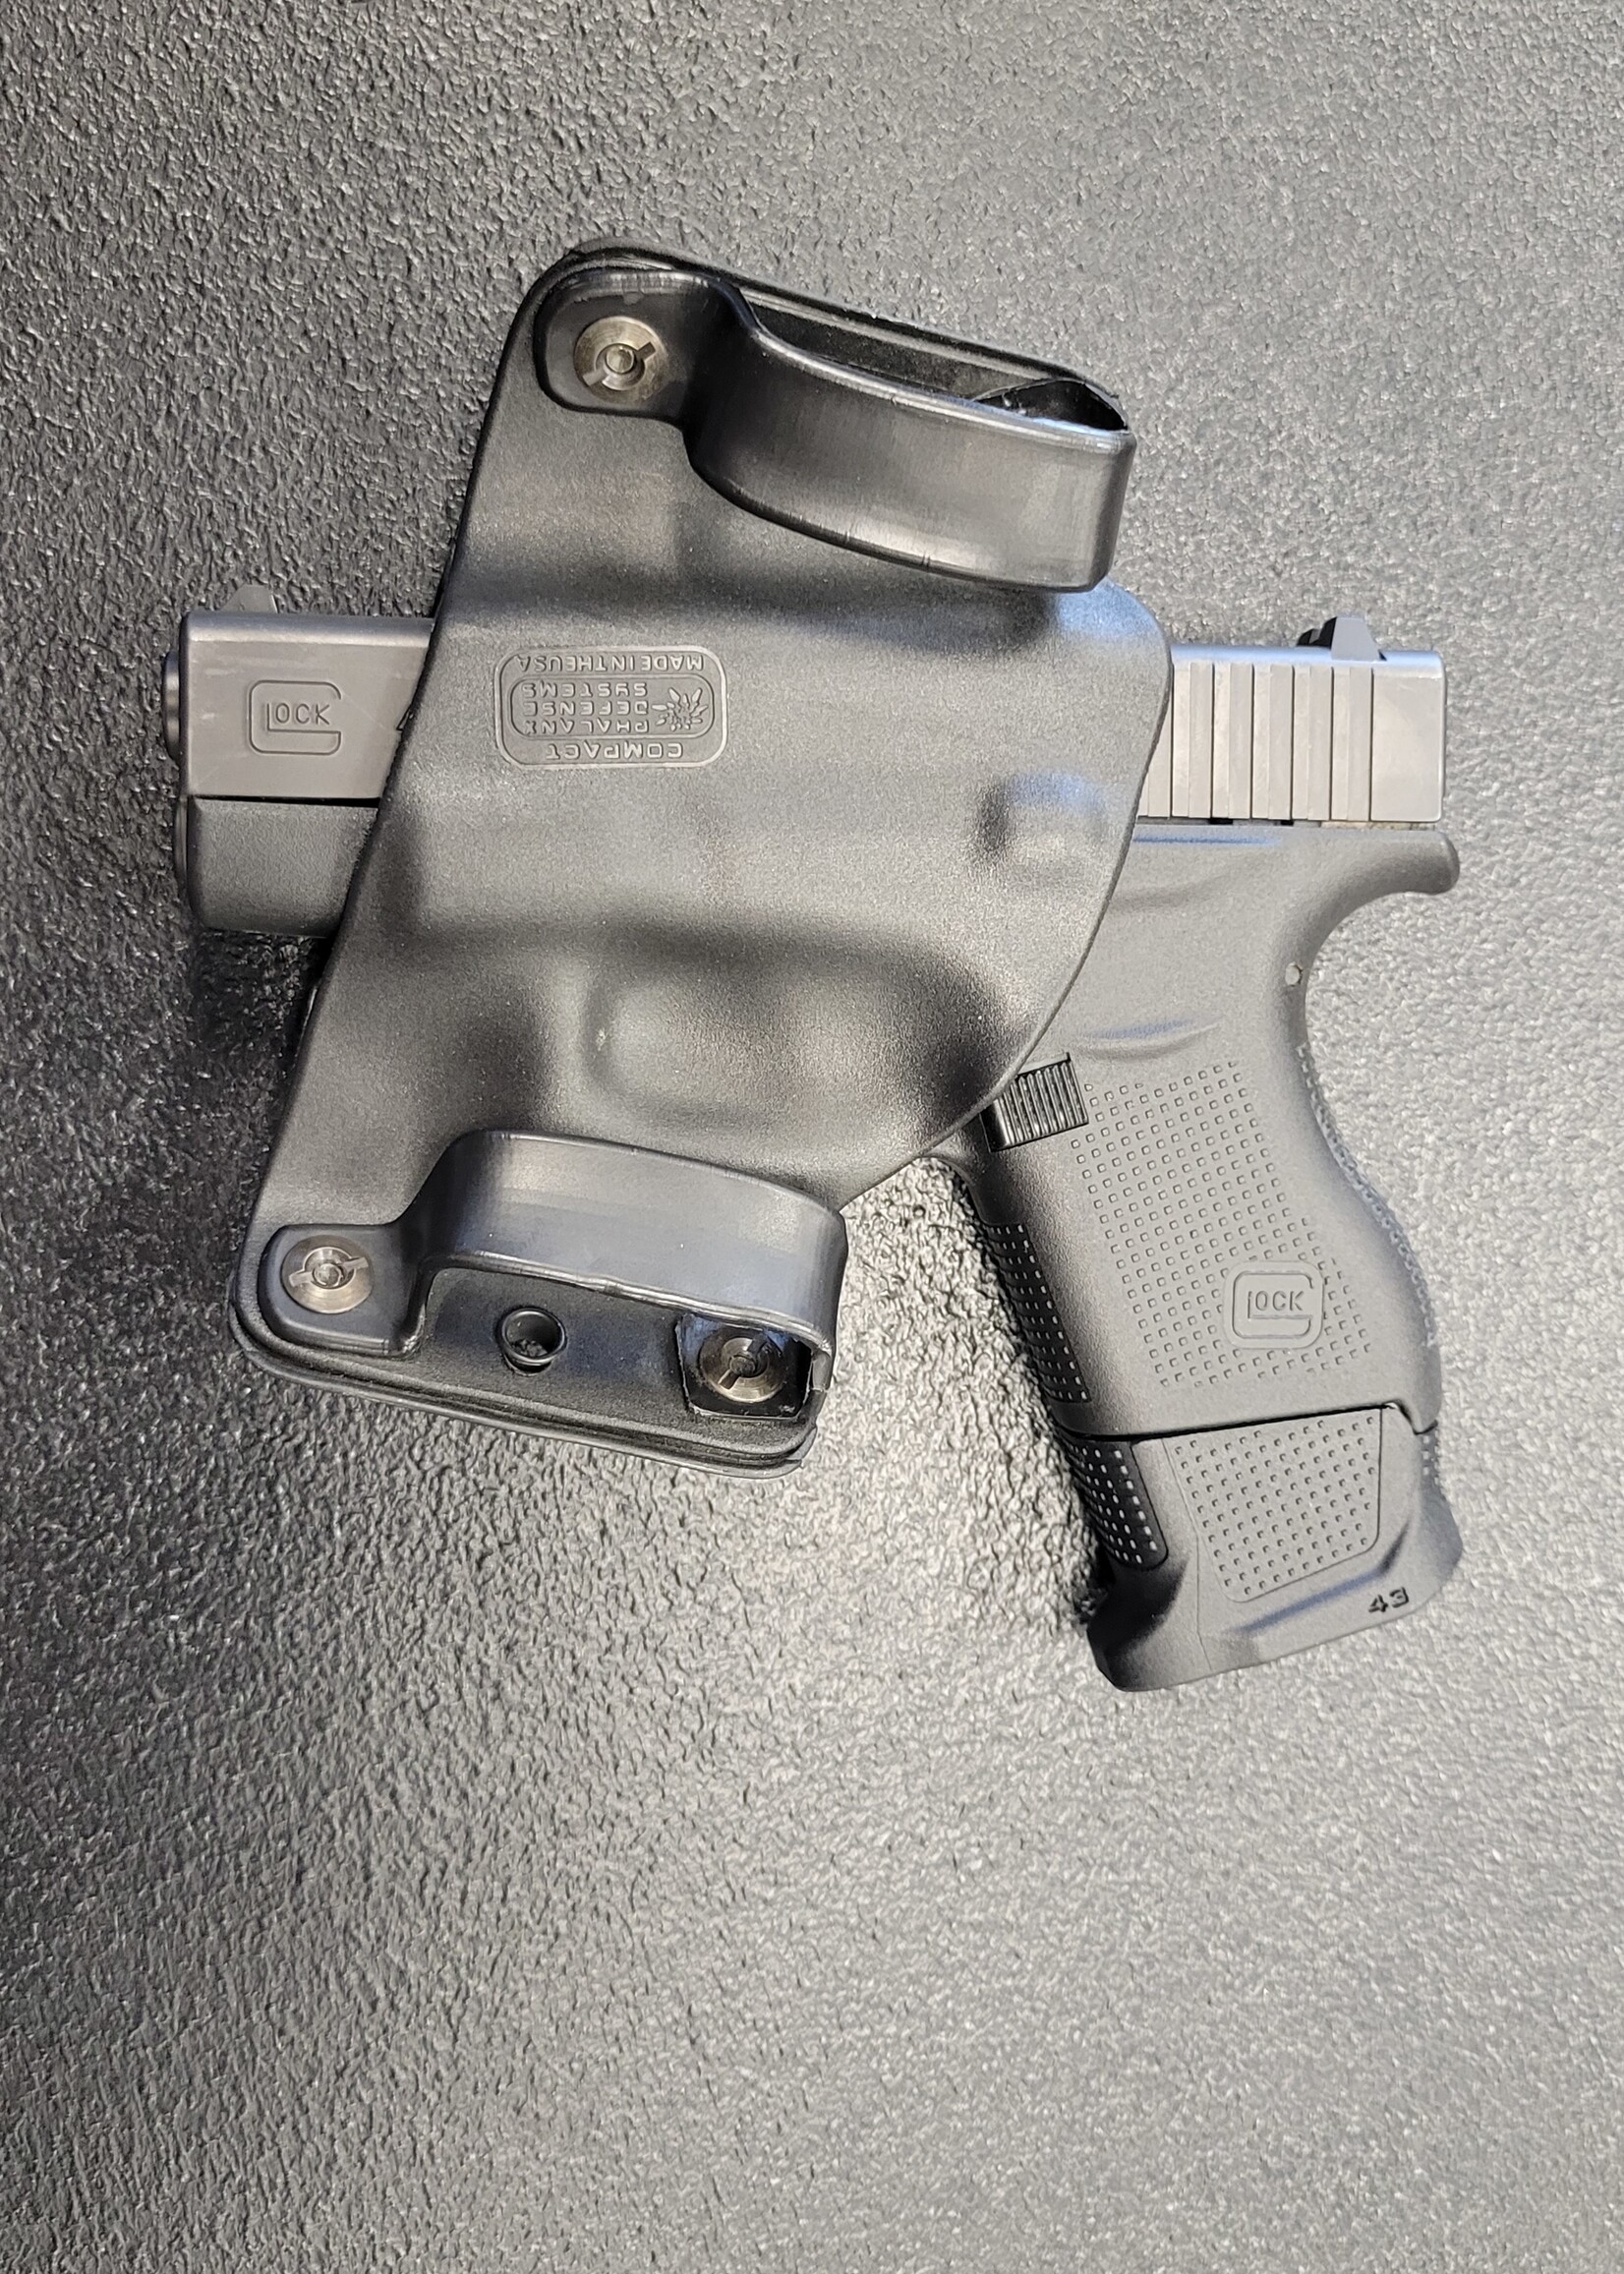 Glock (USED) Glock 43 With extended Magazines Holsters